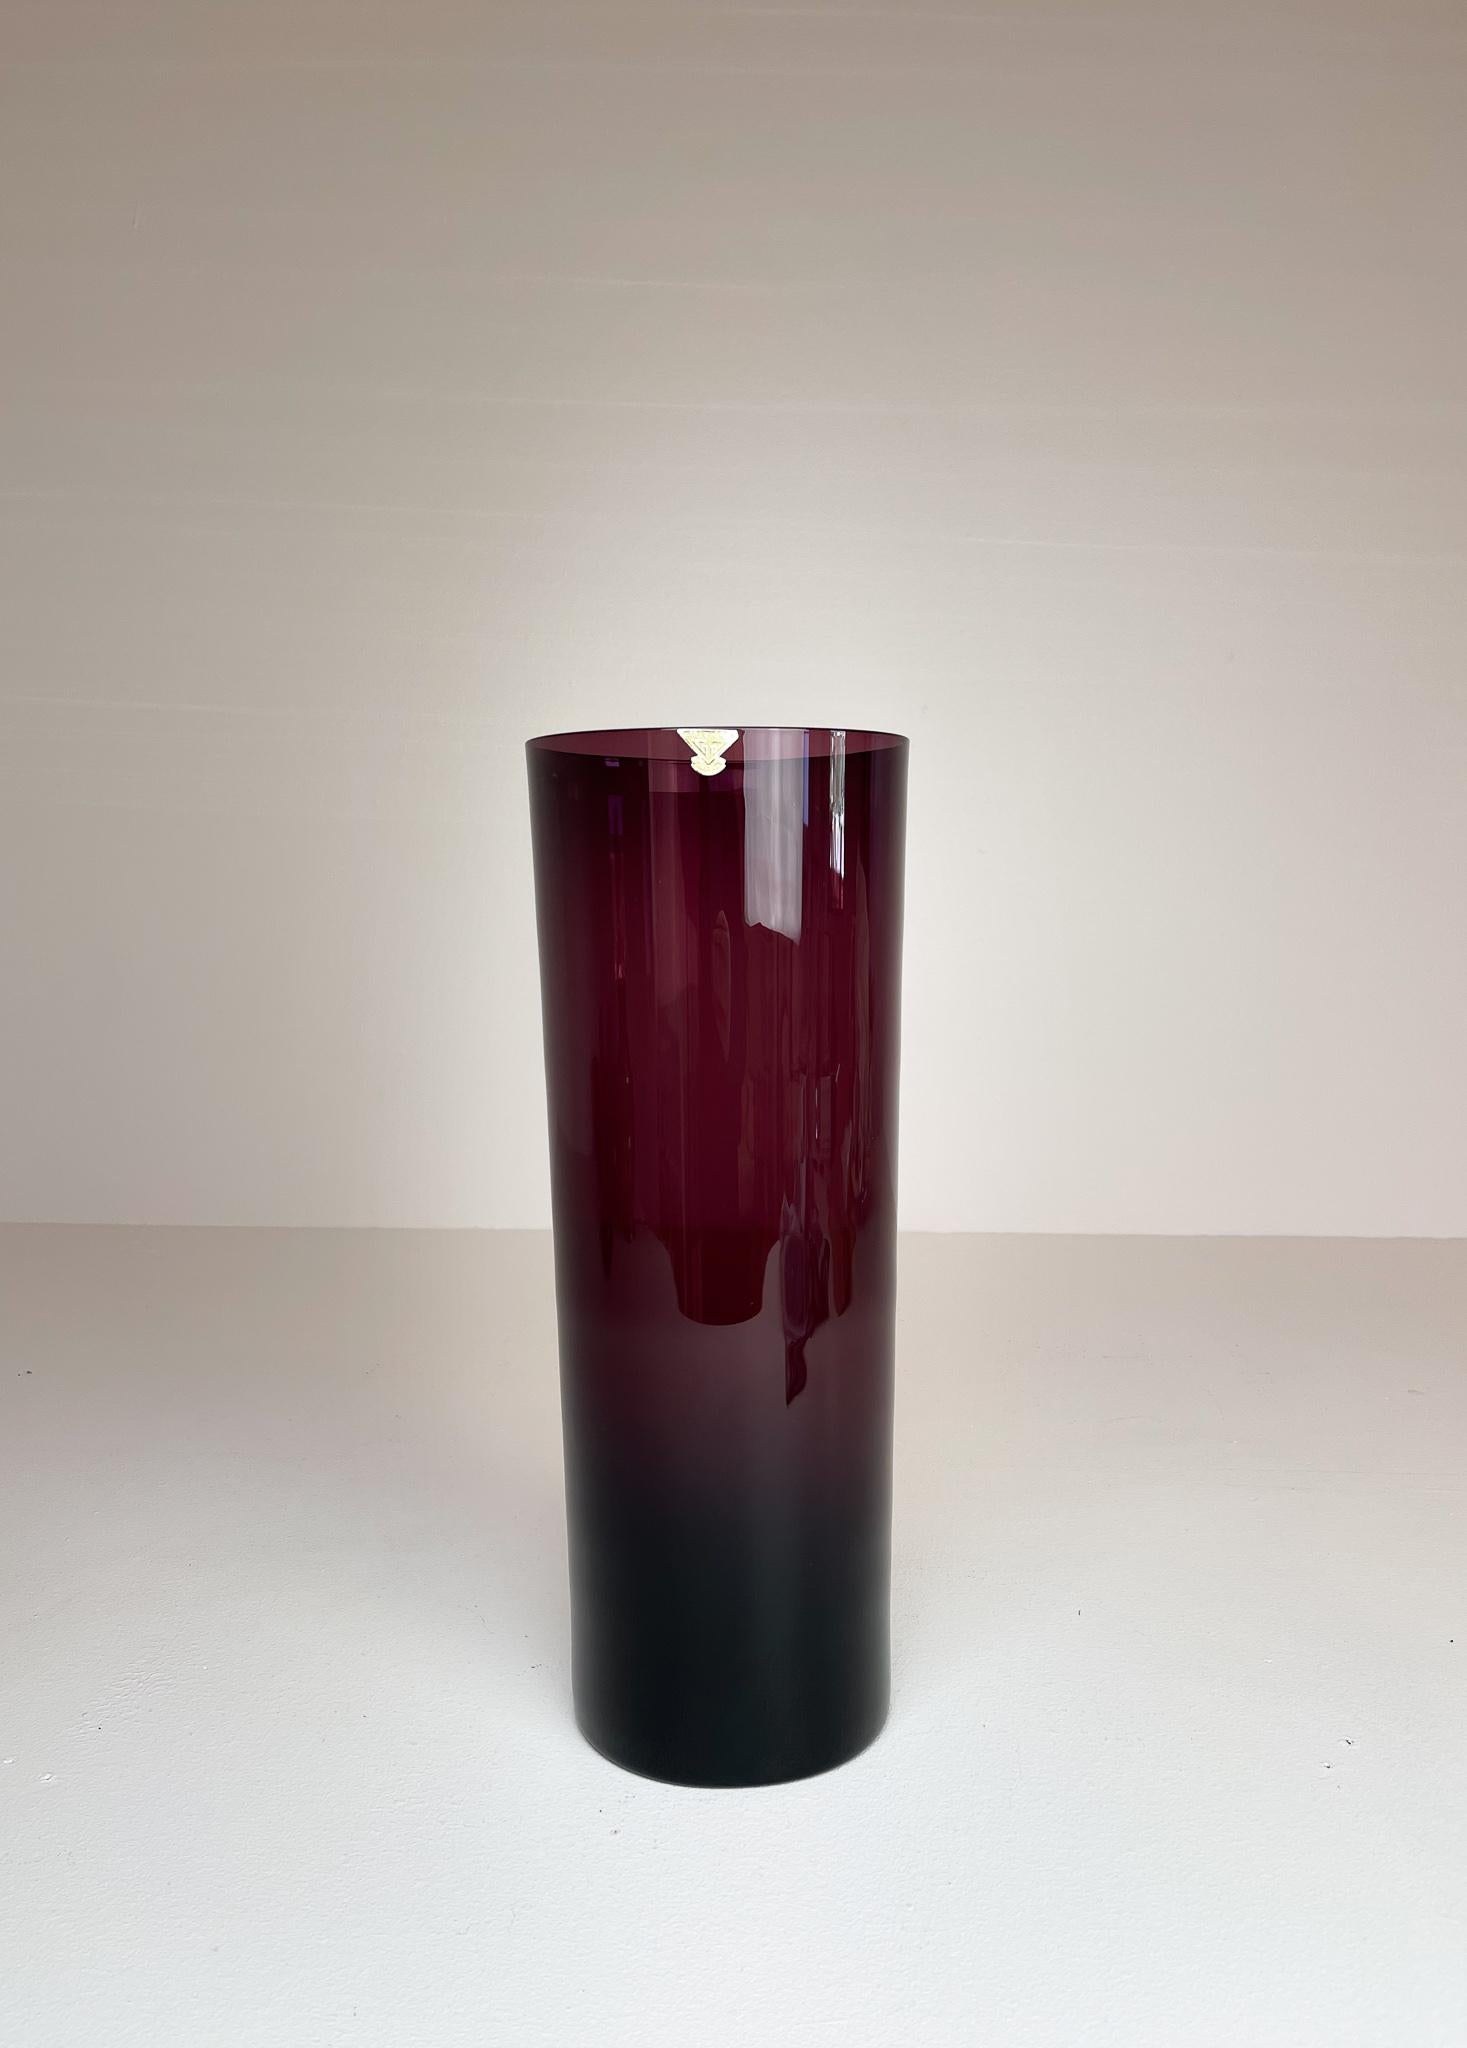 This wonderful large vase made in Sweden at GullaSkruf was designed by Kjell Blomberg in the 1950s.
It has a lovely color and as many of the designers from Sweden the light has a central part to give the glass piece that little bit of extra. This